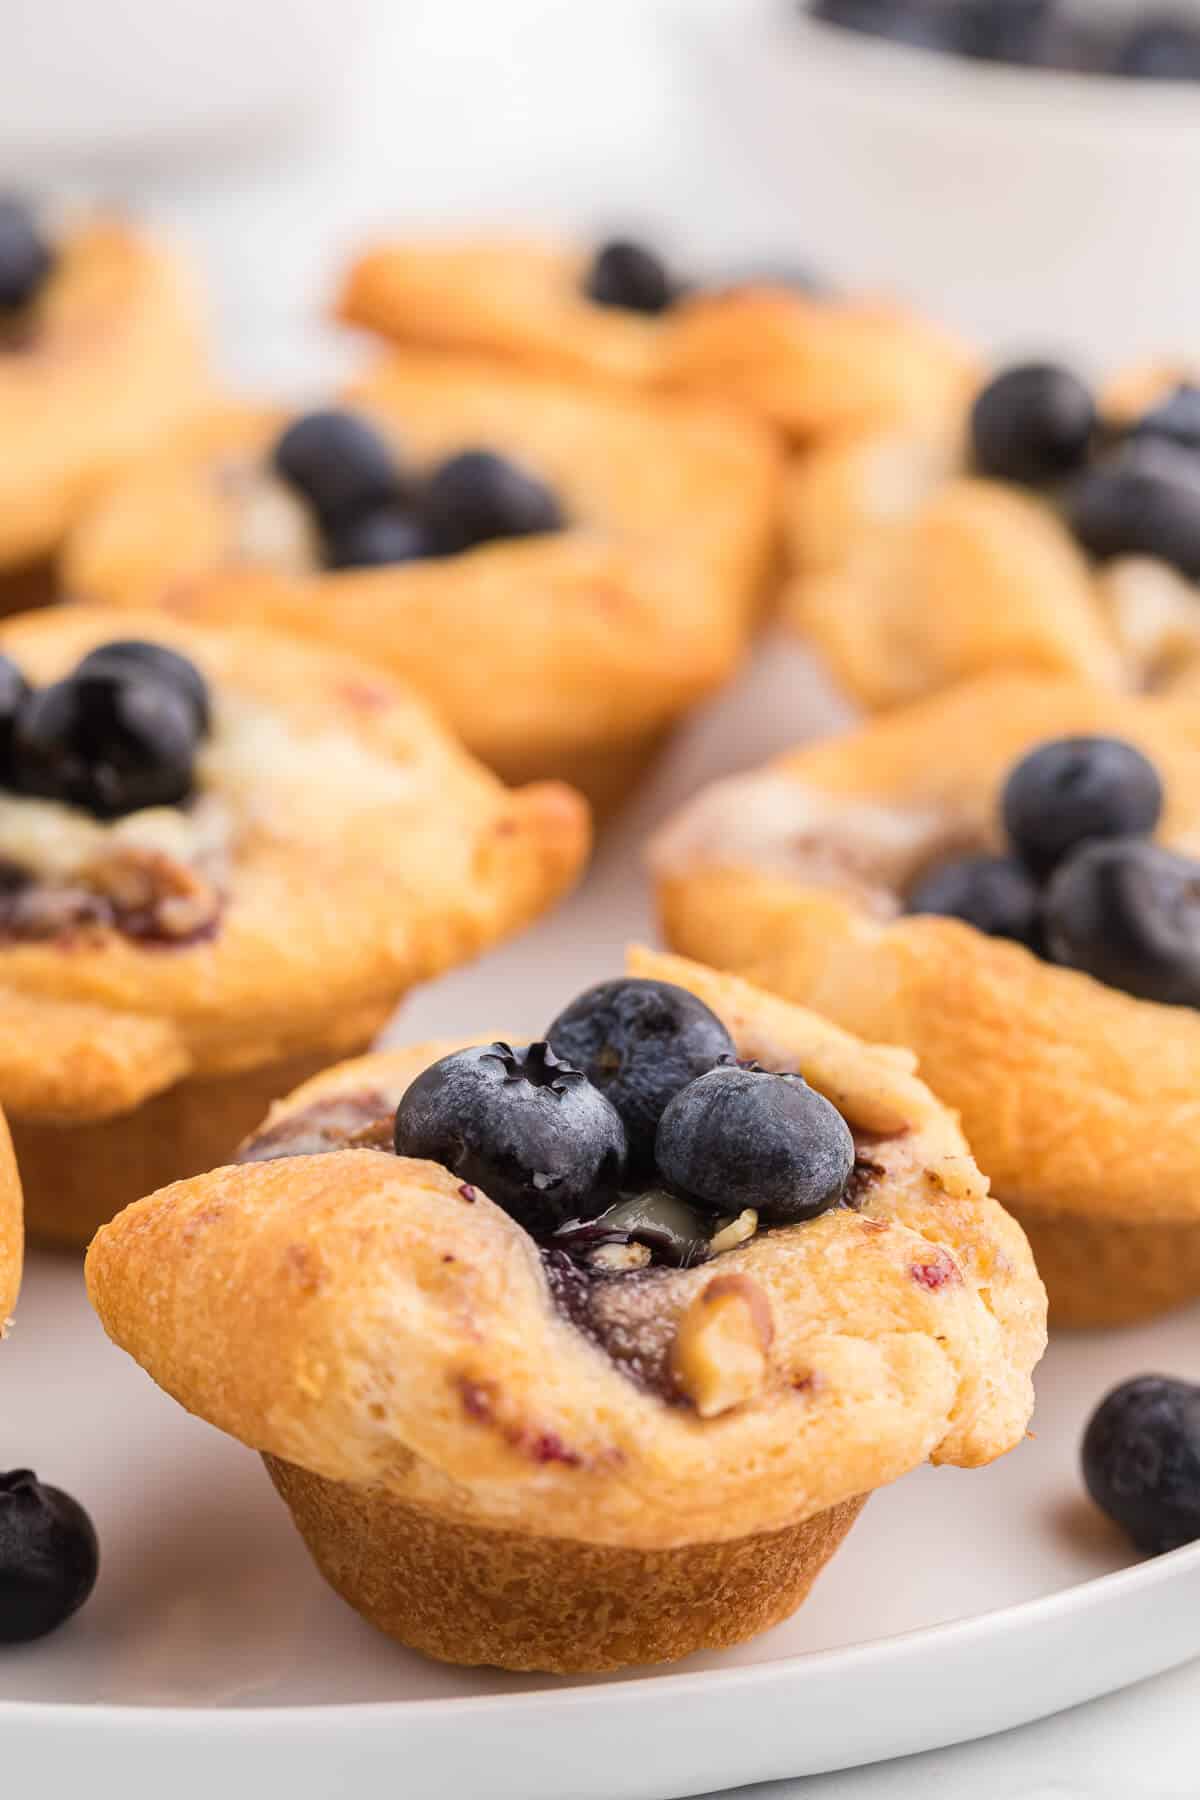 Blueberry Cheese Tarts - Sweet and savory combine in these delicate tarts! Serve as a sweet appetizer or a mini dessert.